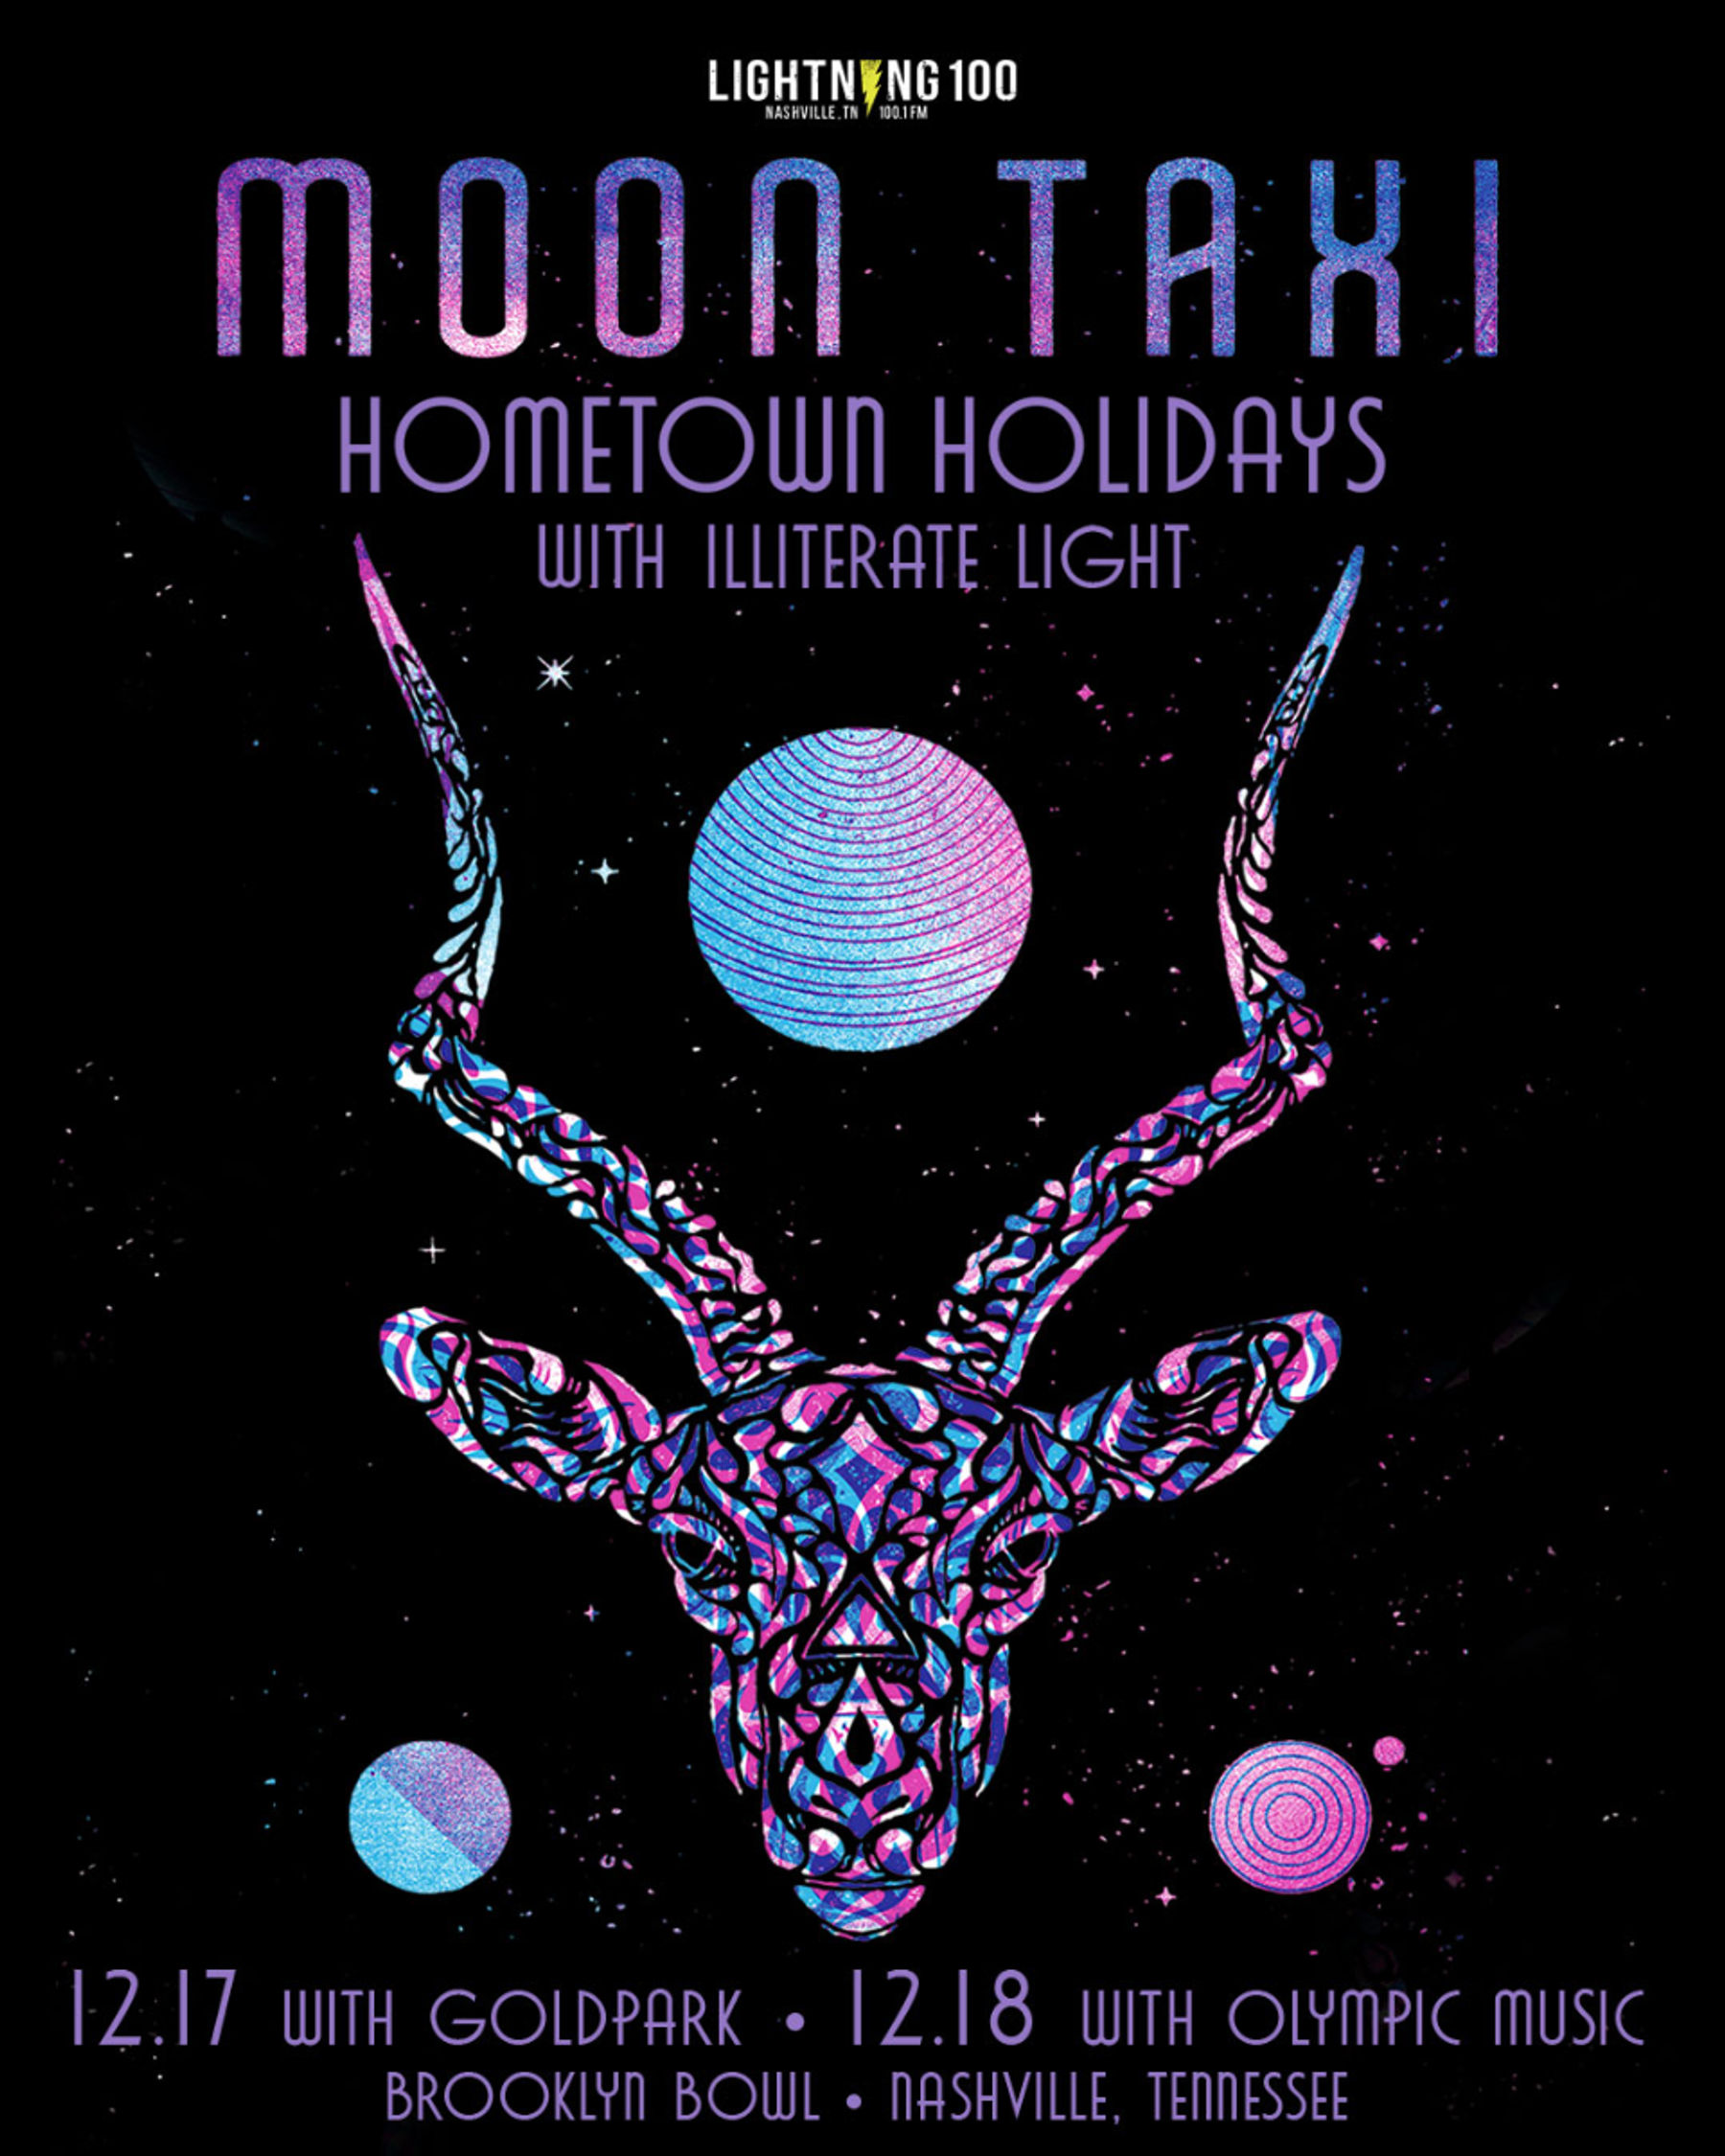 MOON TAXI HOMETOWN HOLIDAYS 2 DAY PASS CONCERT + TOY DRIVE